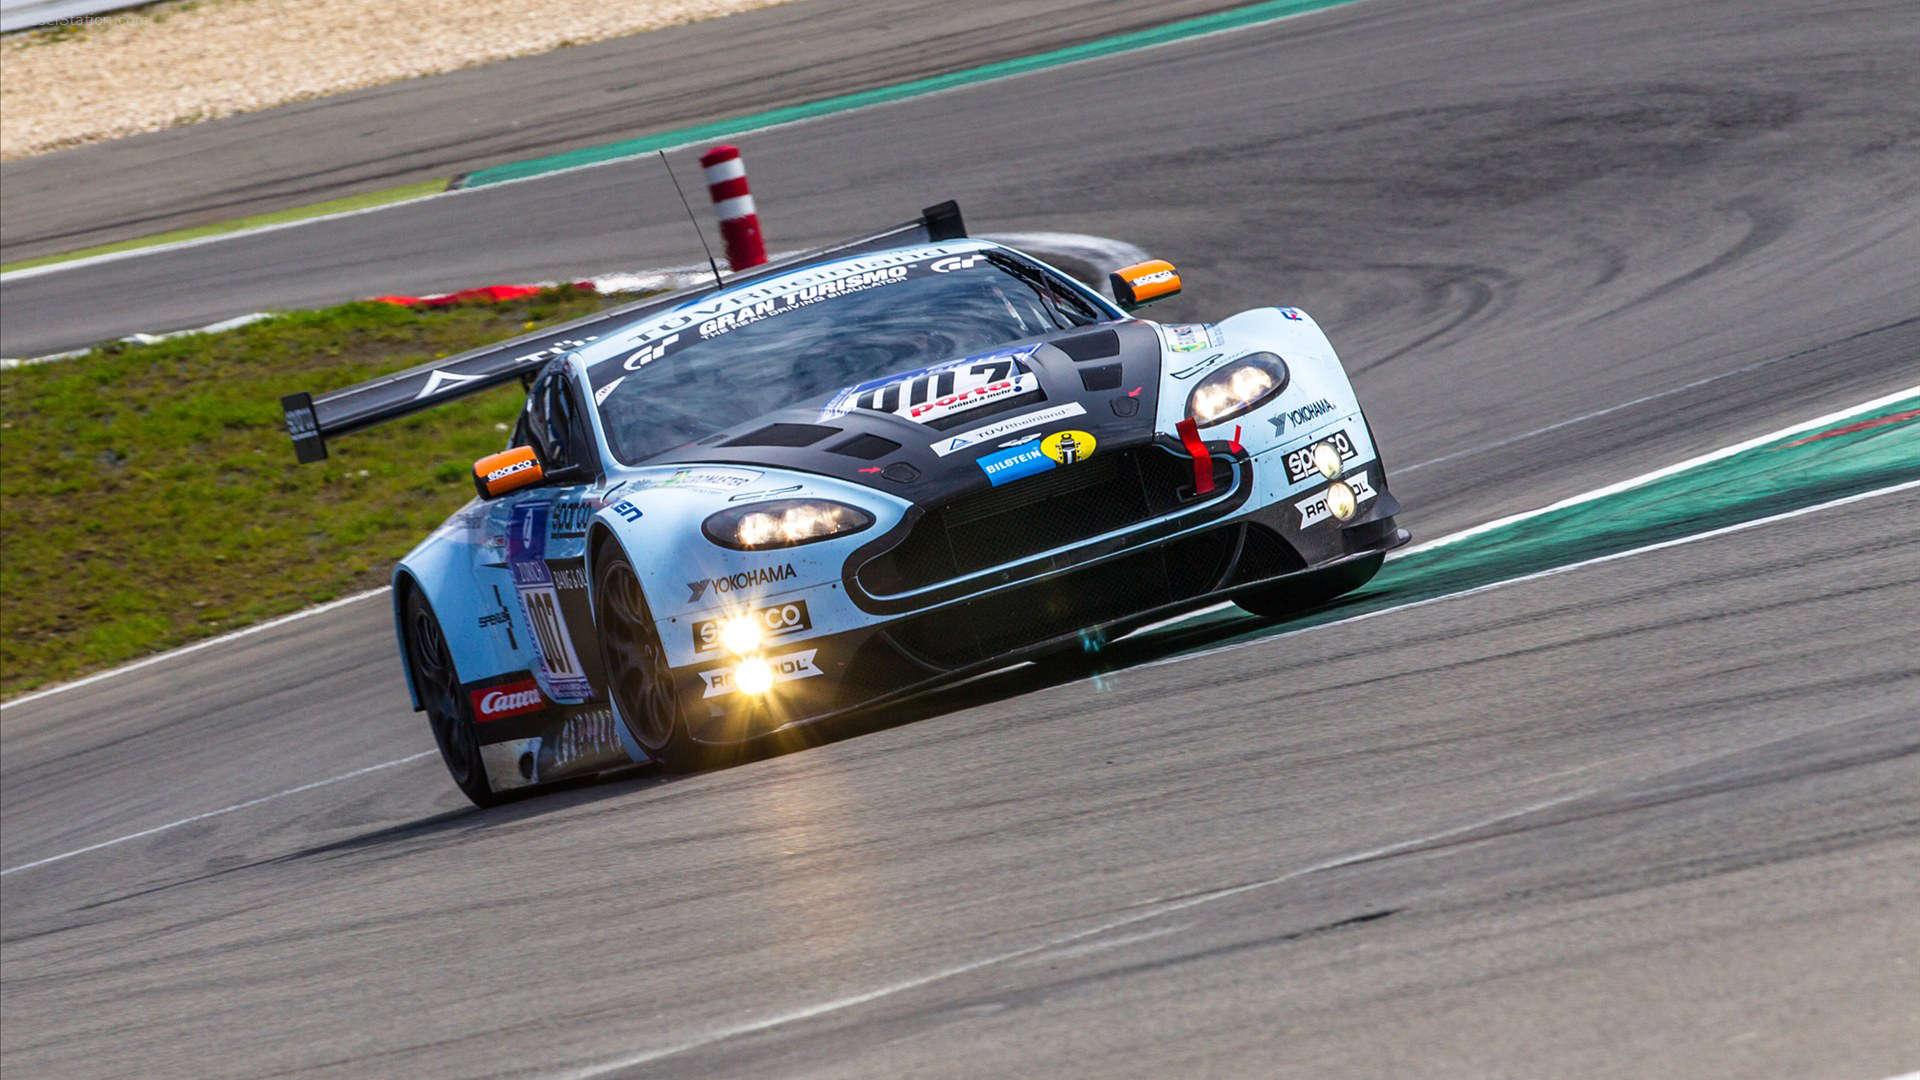 Unrivaled Power And Luxury: The 2012 Aston Martin V12 Vantage GT3